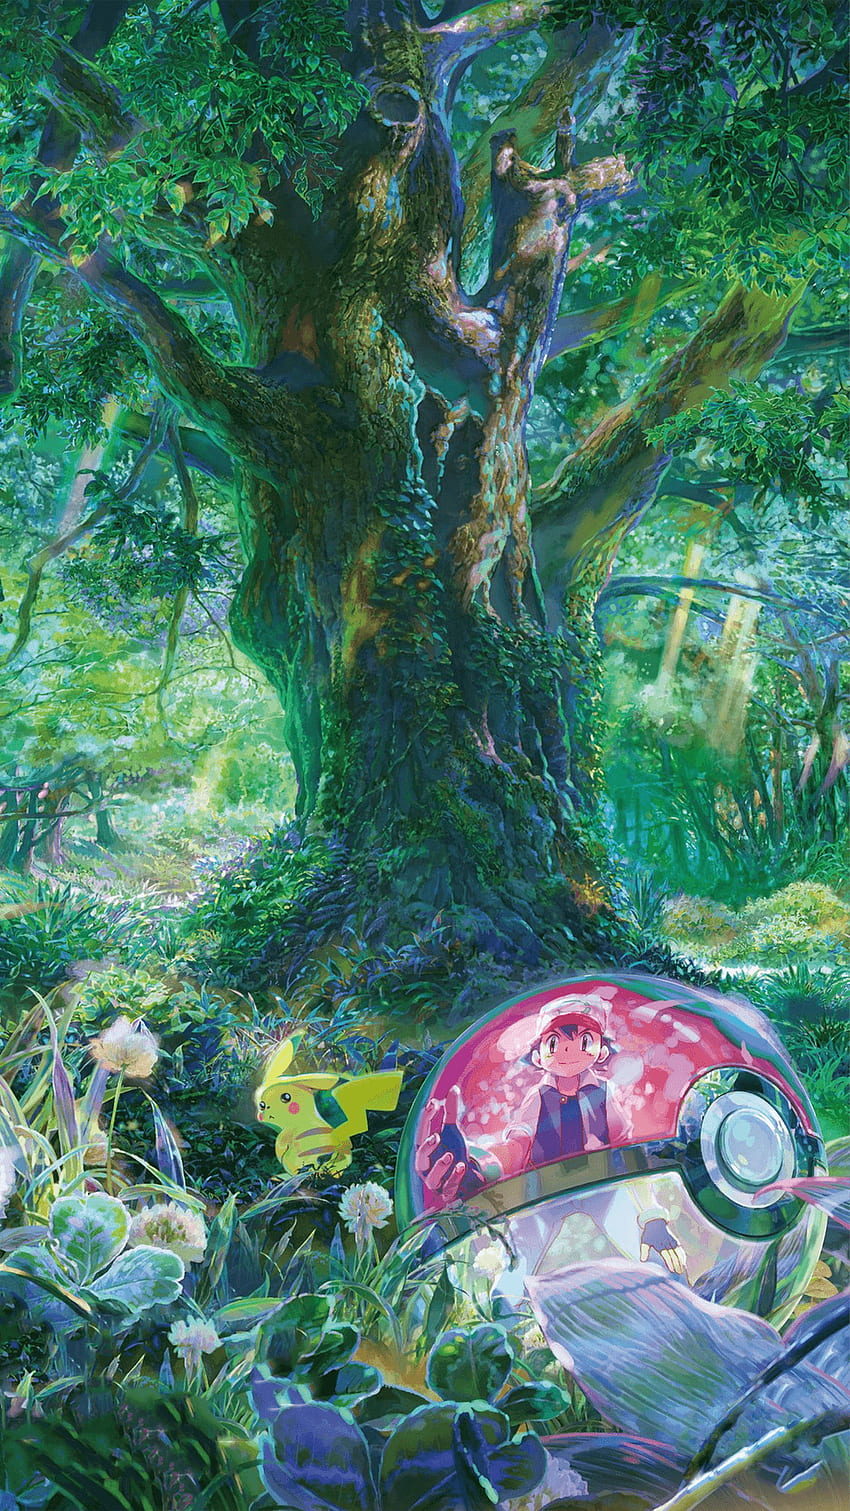 I made textless mobile and out of the Pokemon The Movie: I Choose You 20th anniversary poster, Pokémon Forest HD phone wallpaper